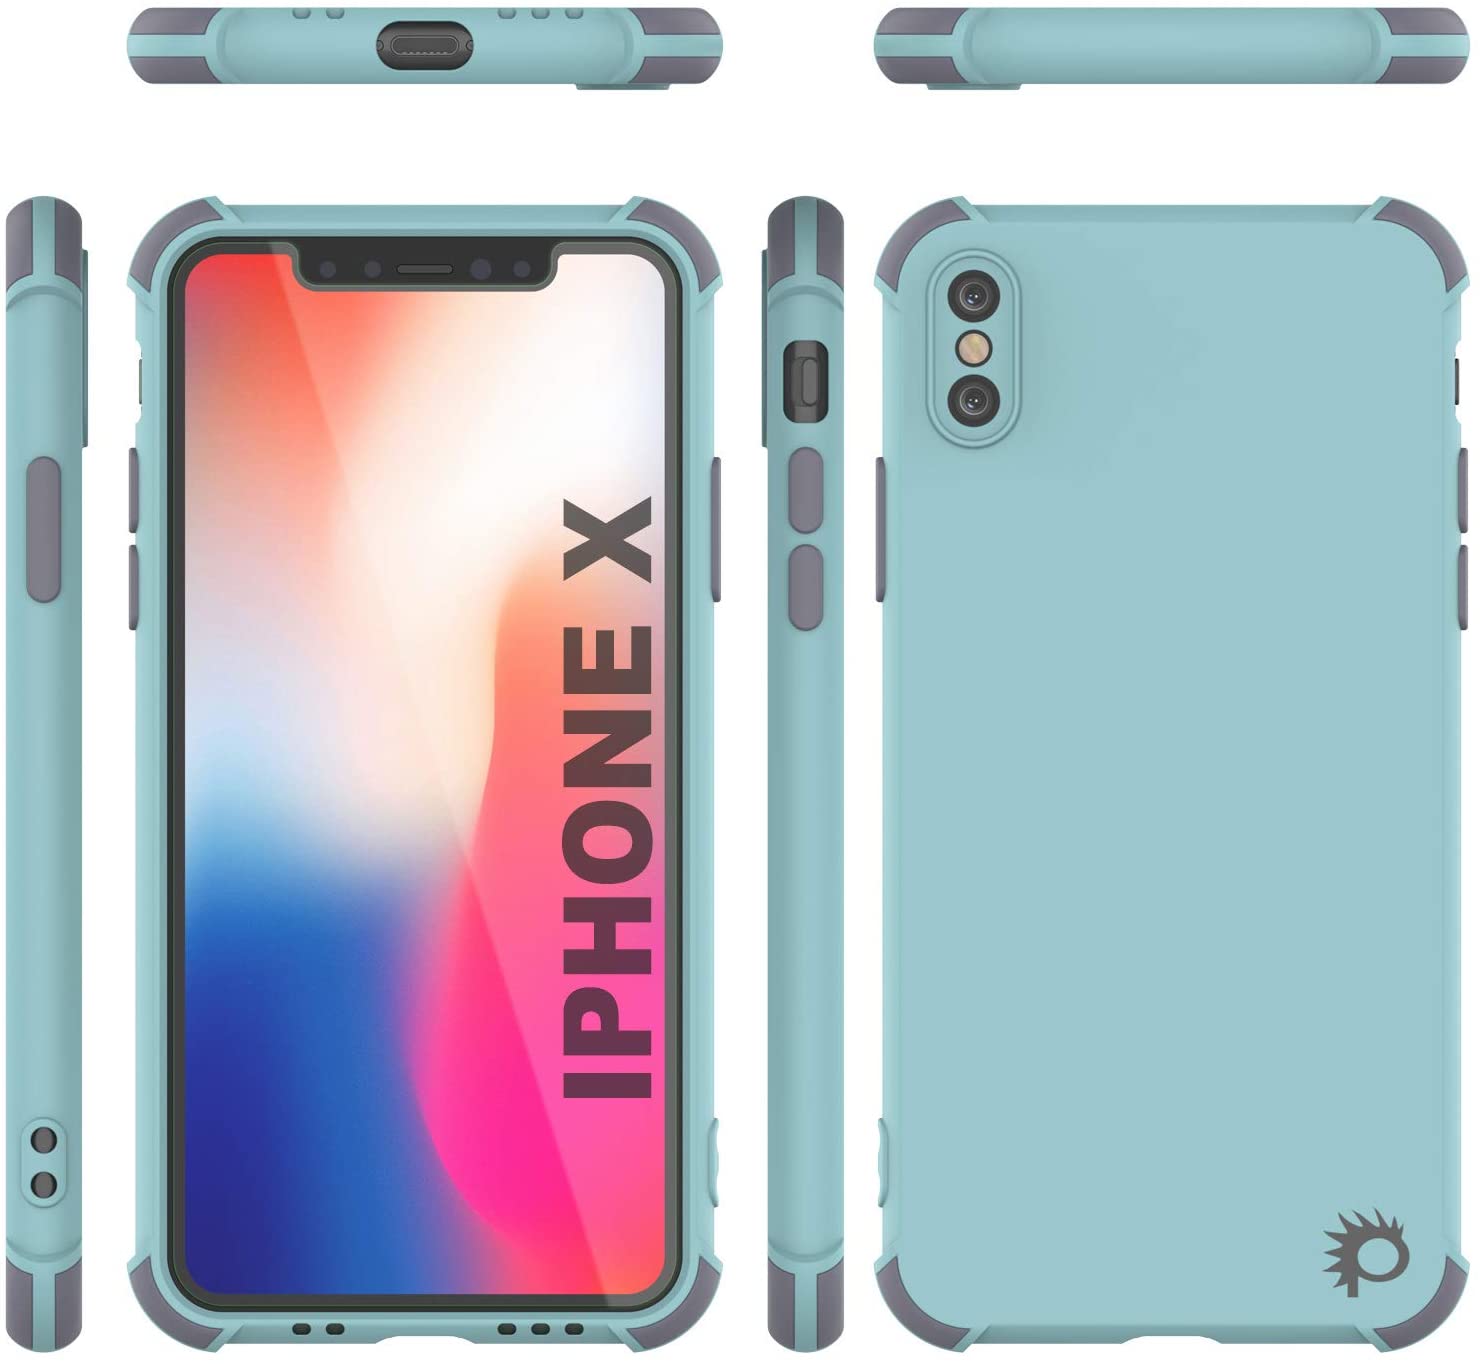 Punkcase Protective & Lightweight TPU Case [Sunshine Series] for iPhone X [Teal]